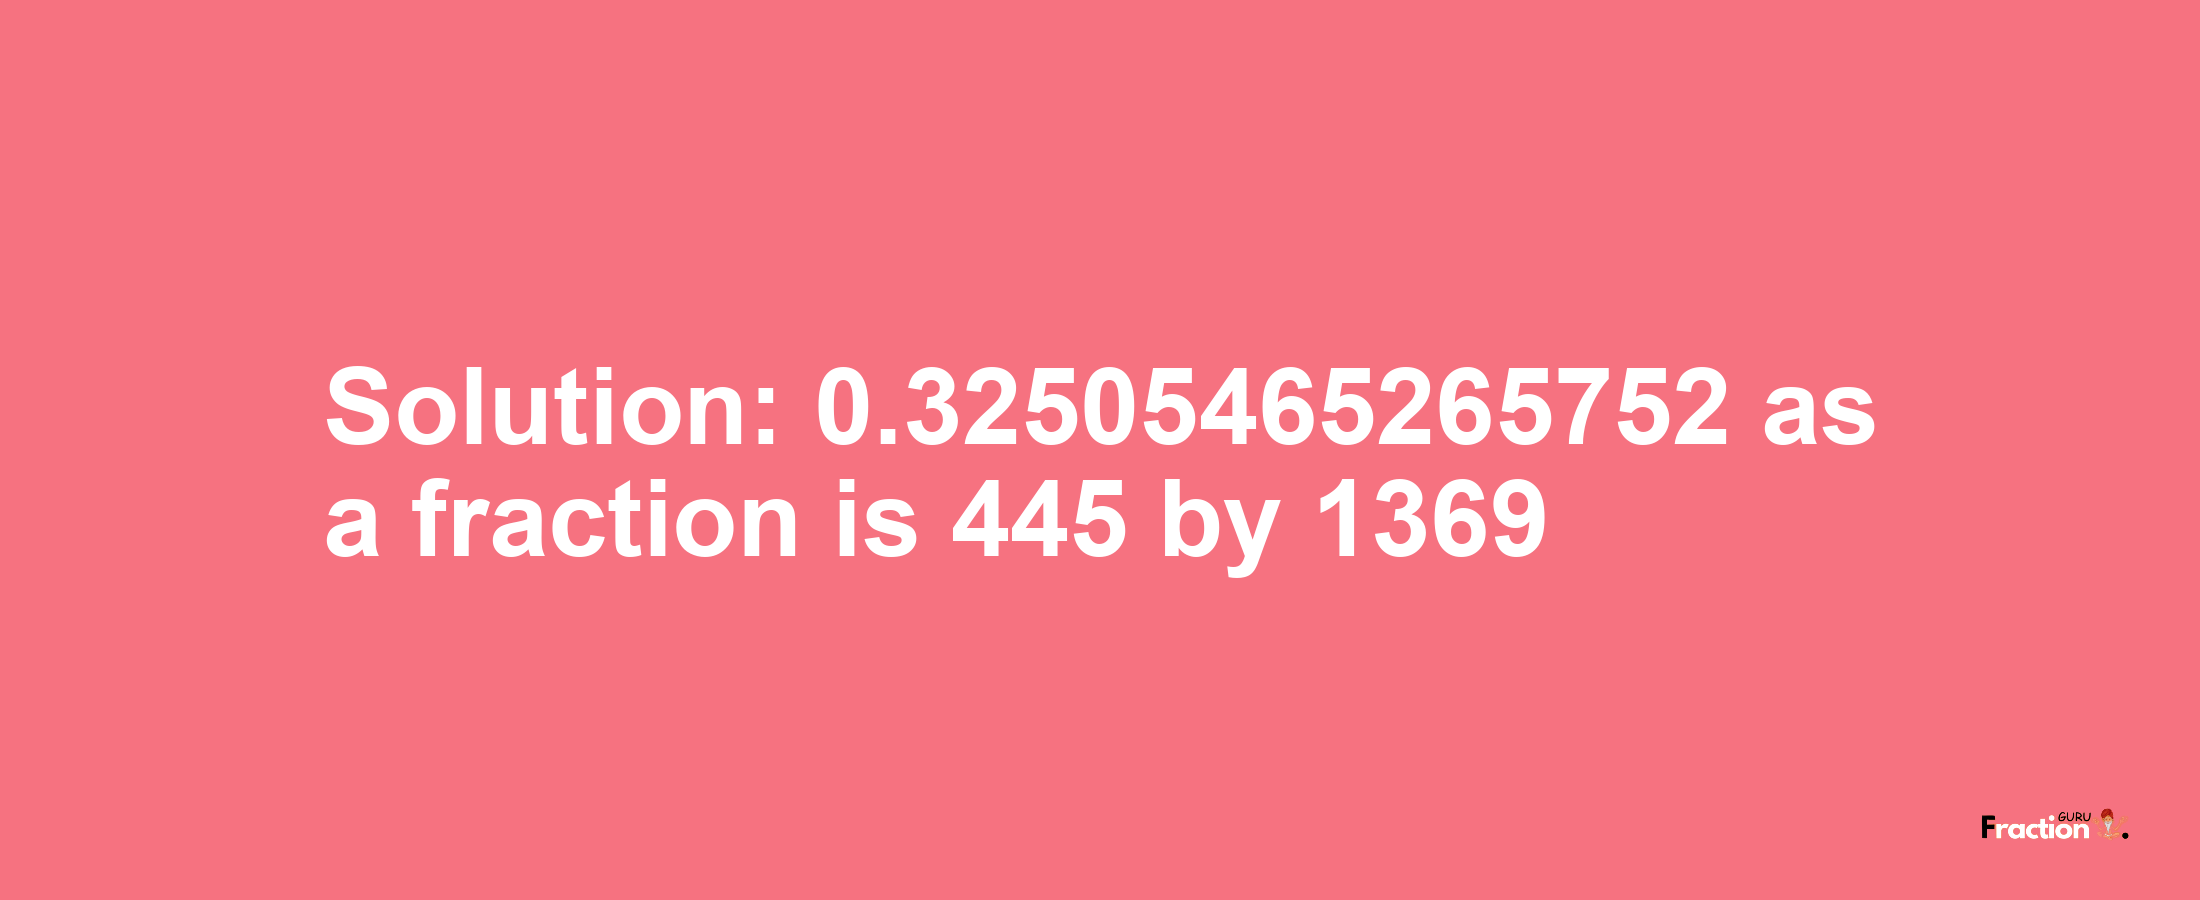 Solution:0.32505465265752 as a fraction is 445/1369